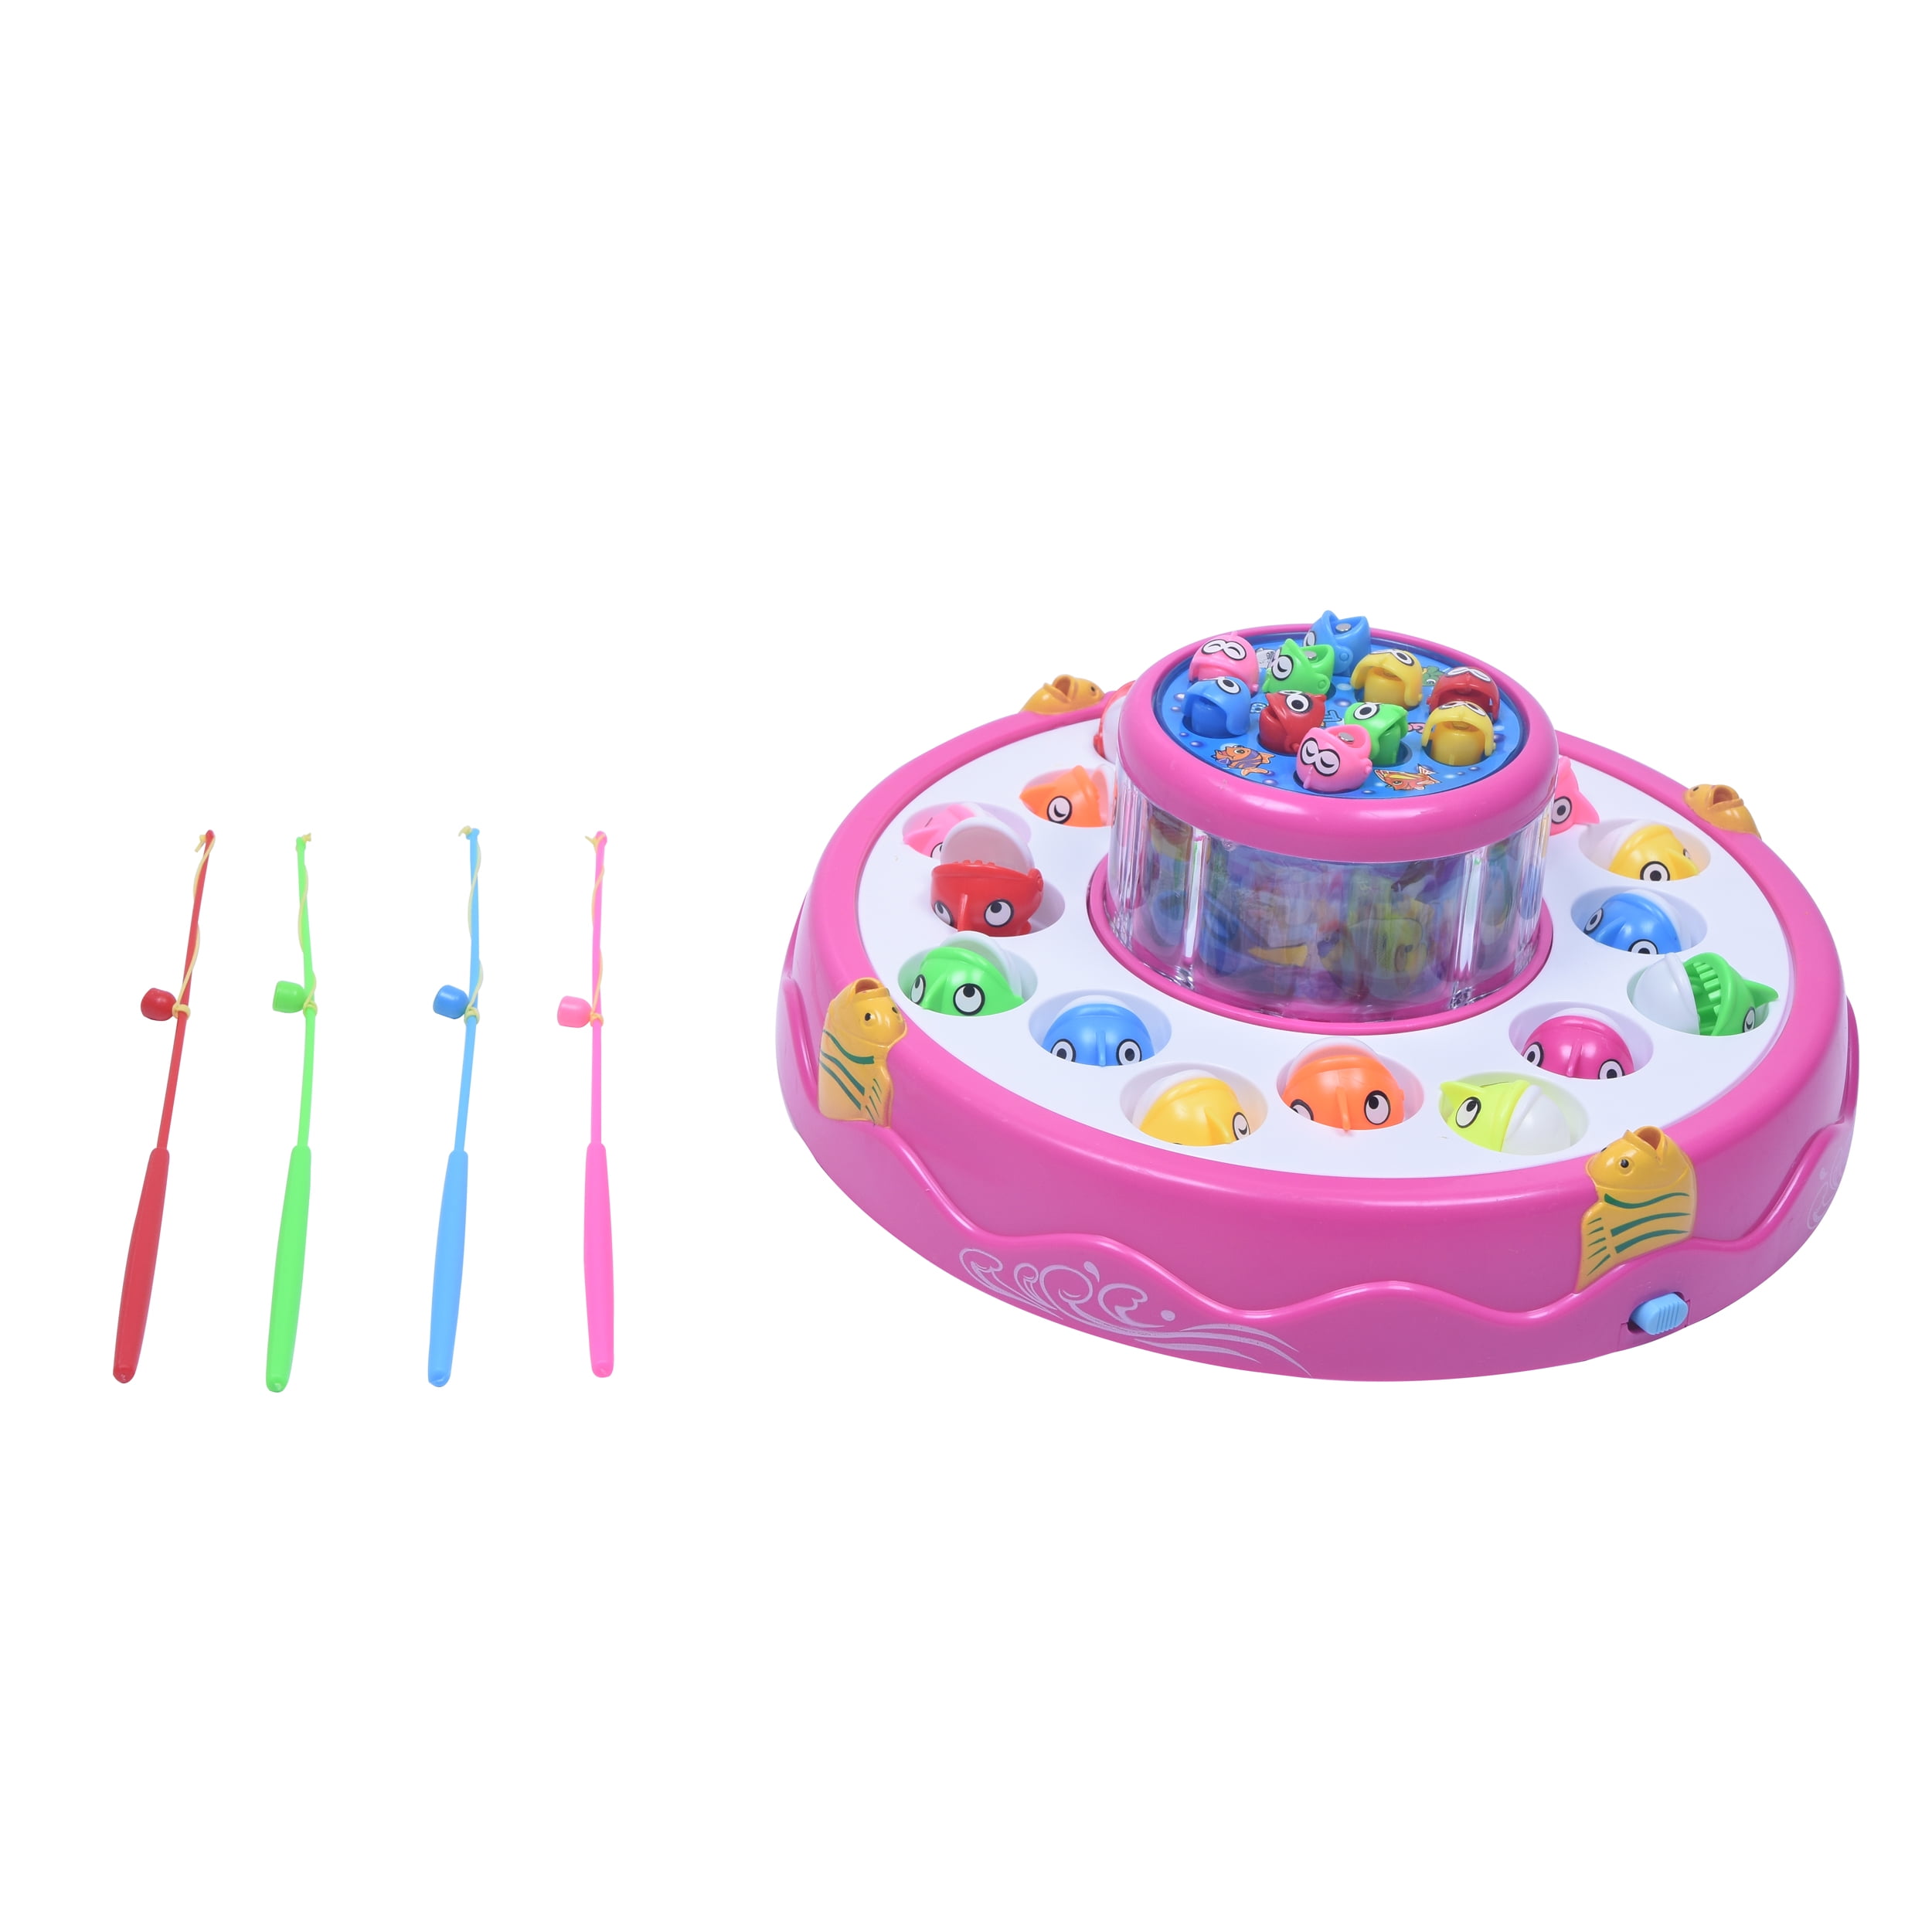 WonderPlay Let's Go Fishing! 2 Spinning Fishing Pond With Sounds